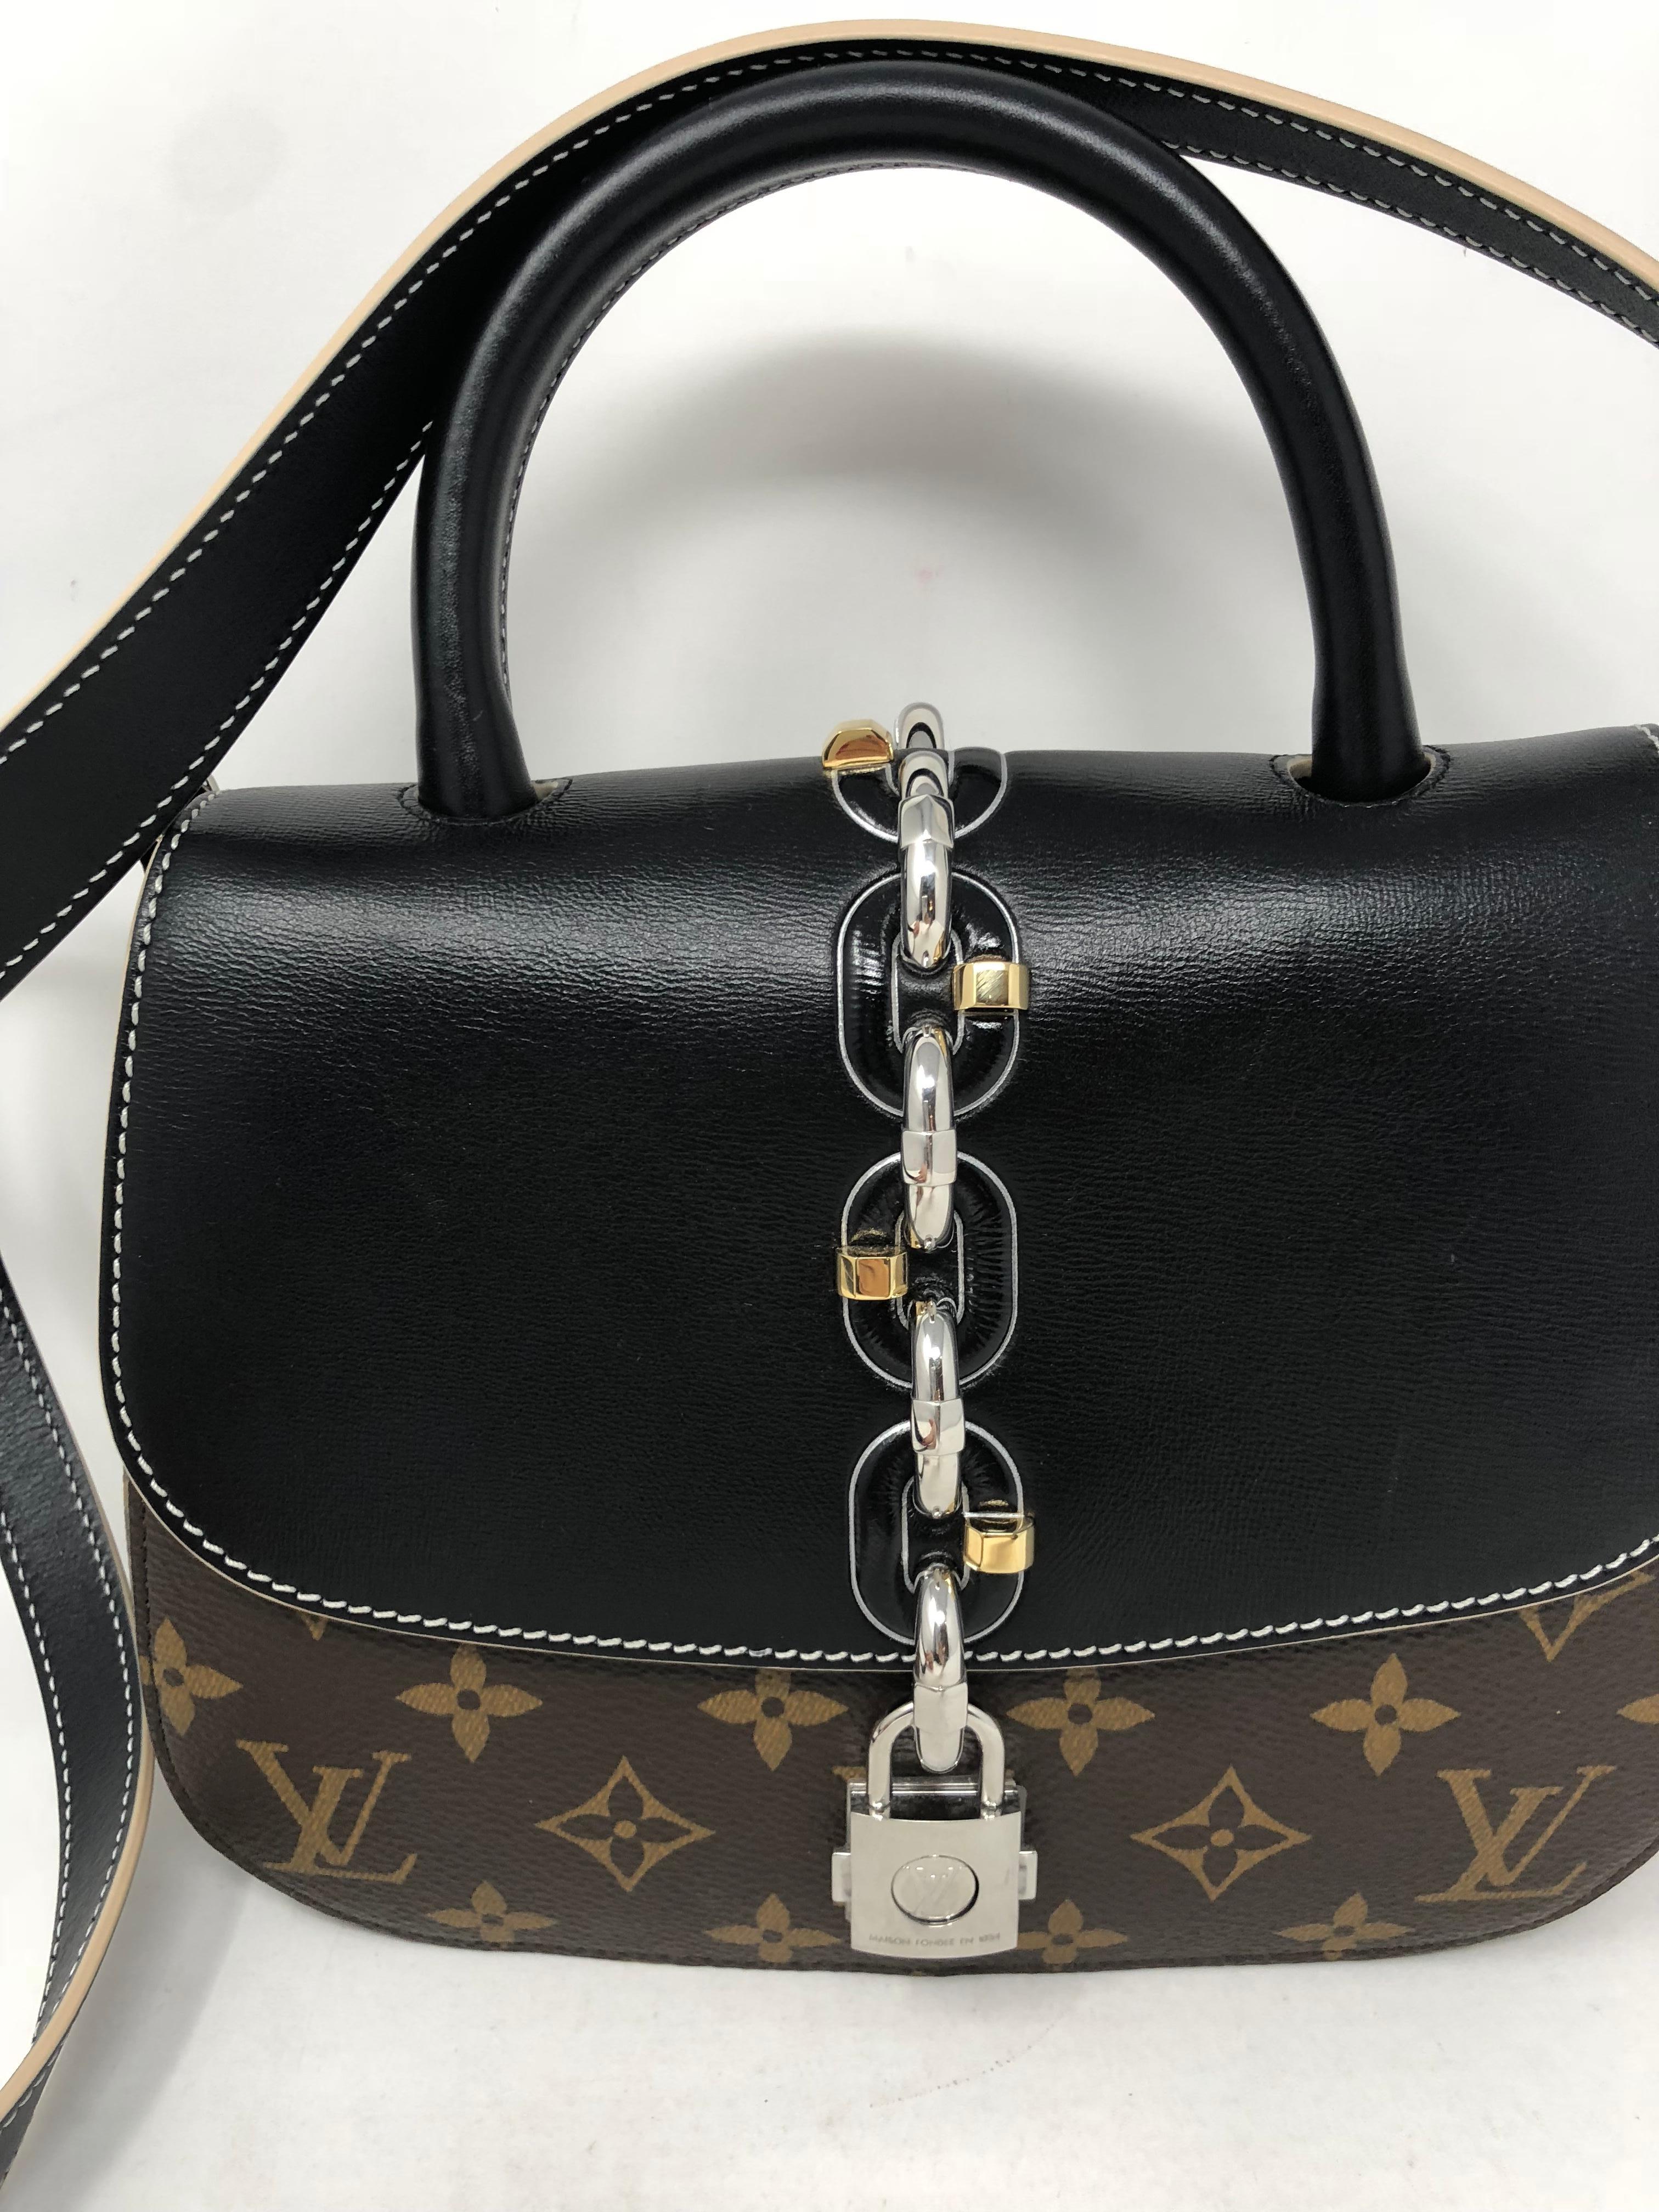 Louis Vuitton Chain It Bag in monogram and black leather. Sold out and limited. Runway piece. Like new condition. Unique closure. Guaranteed authentic. 